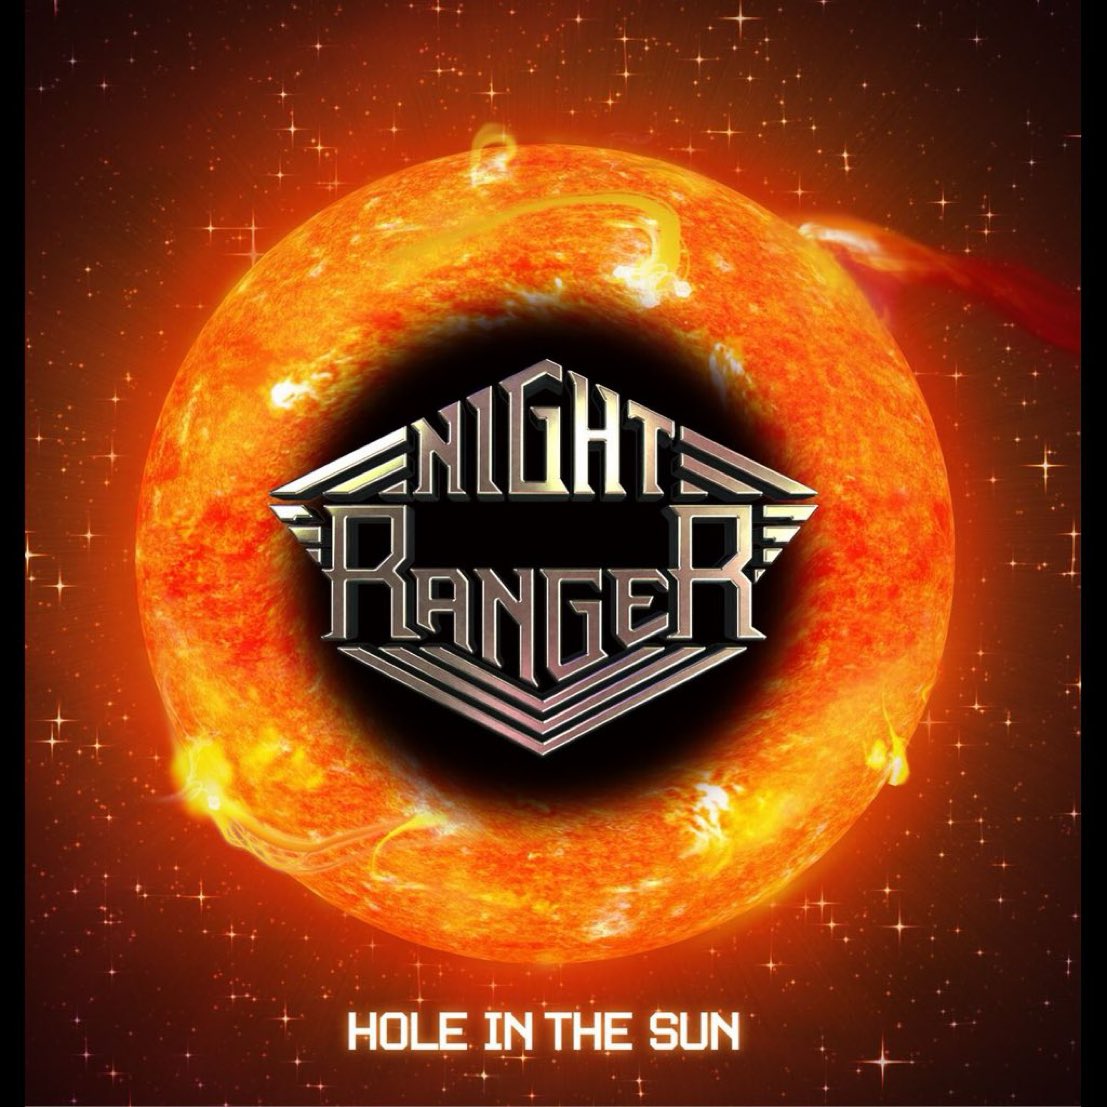 @FansInMotion Hello, I bought another Night Ranger CD! This time it’s “Hole in the Sun”. My mental health has been terrible lately and I’ve tried my hardest to bring that up through music that means a lot to me. I hope you appreciate me sharing, I’m sorry for the annoyance.